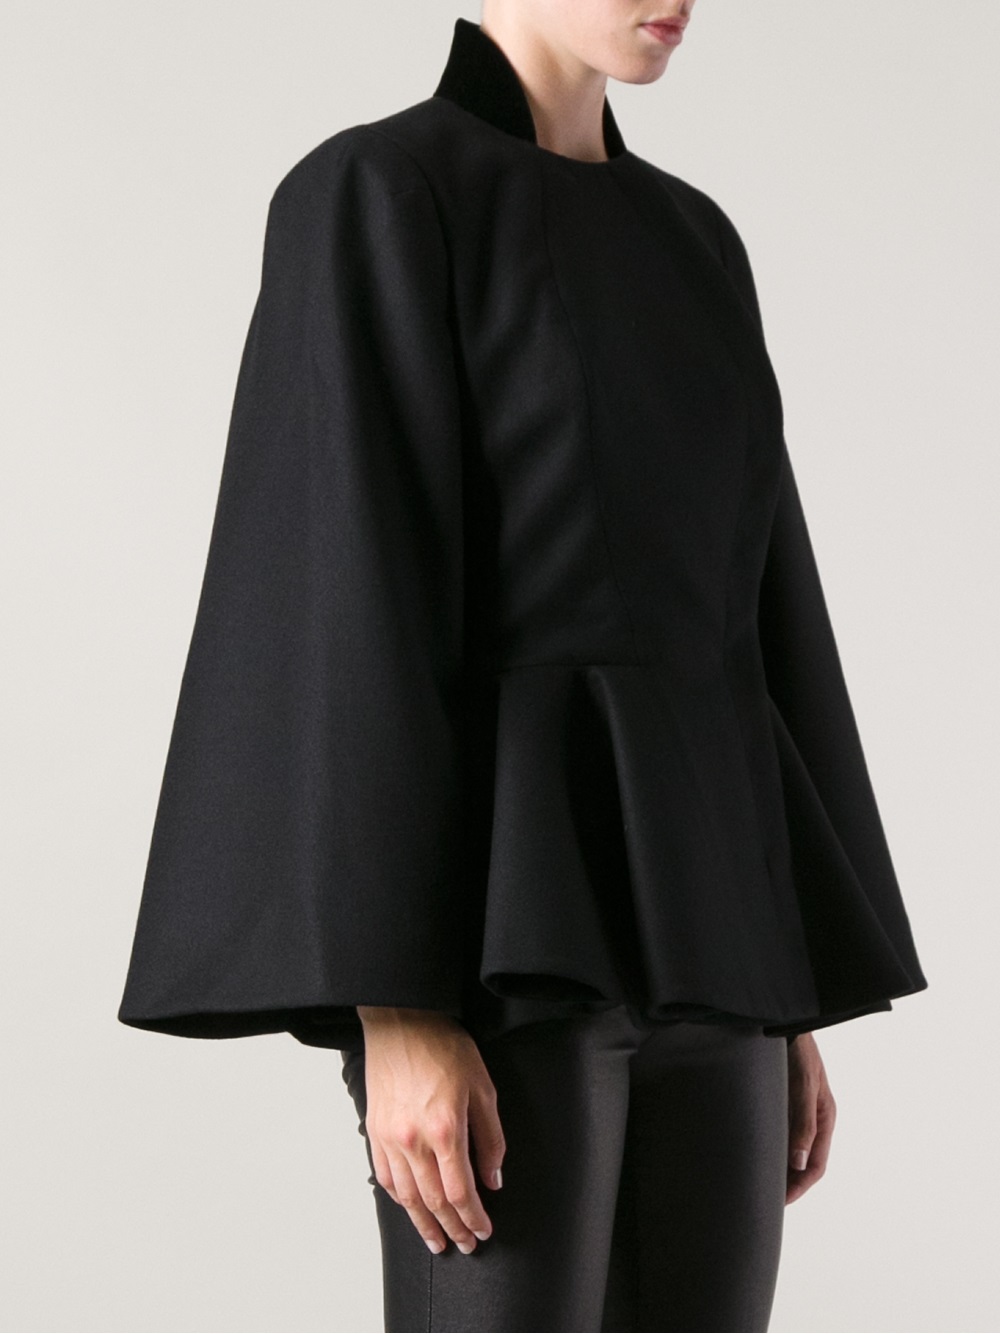 Lyst - Alexander Mcqueen Fitted Cape in Black